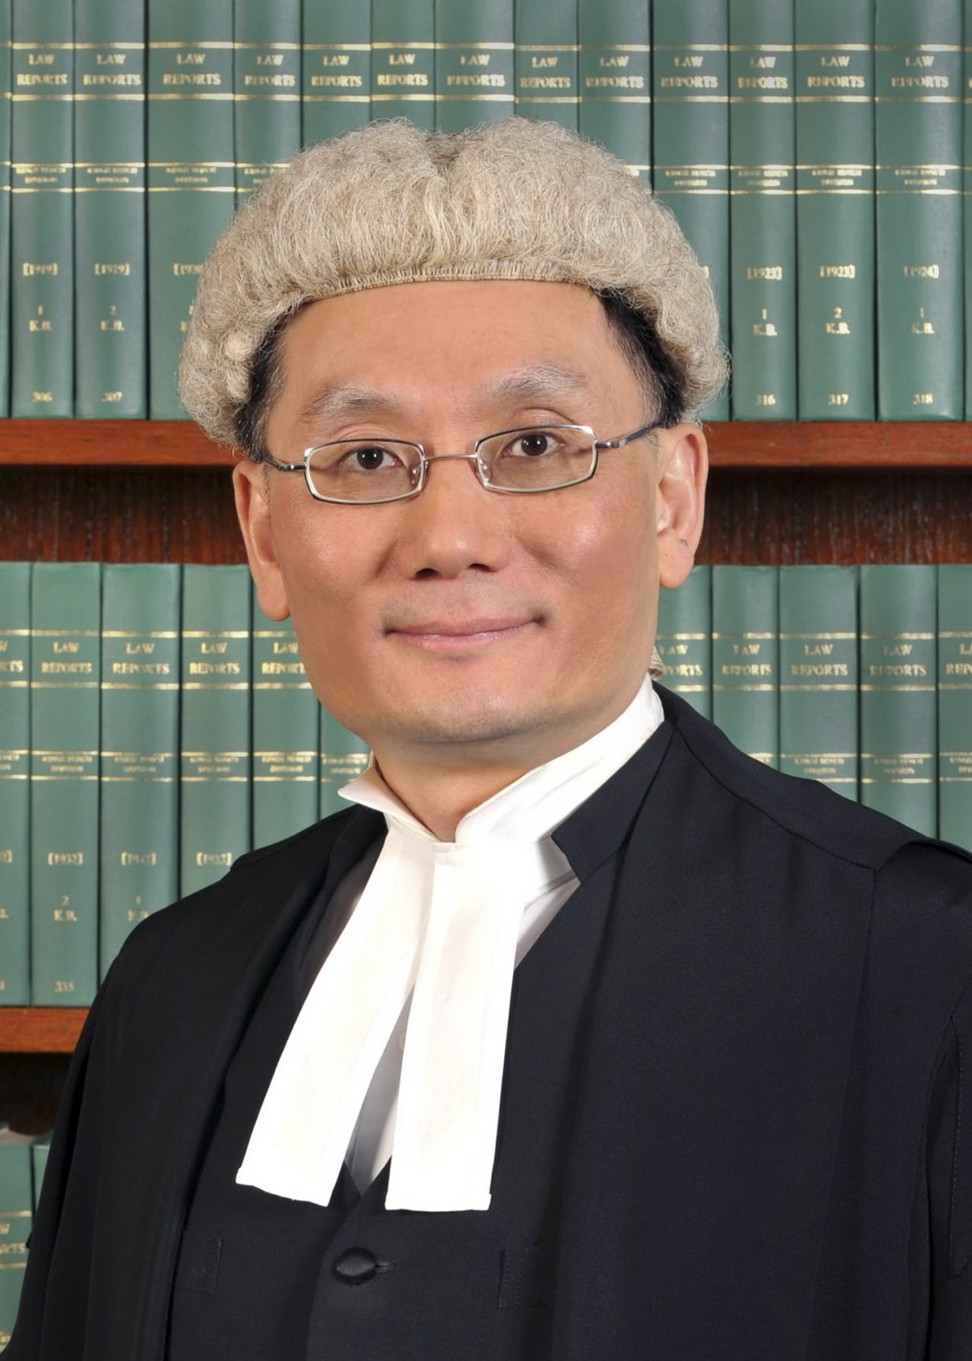 Justice Andrew Cheung has been tipped as the next chief justice of the Court of Final Appeal, with the incumbent due to reveal his retirement in the coming days. Photo: Handout